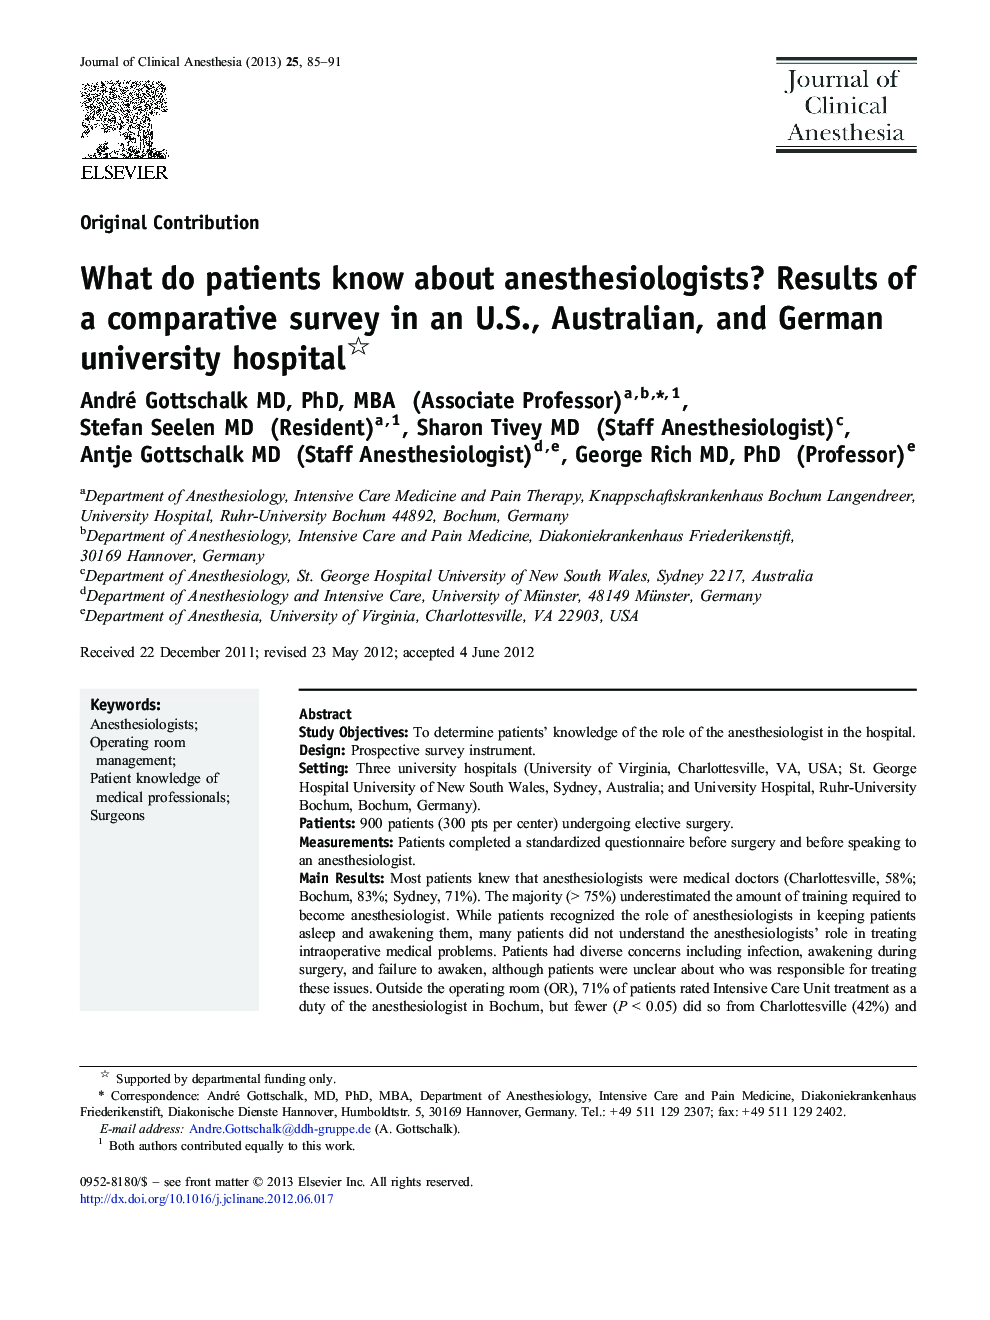 What do patients know about anesthesiologists? Results of a comparative survey in an U.S., Australian, and German university hospital